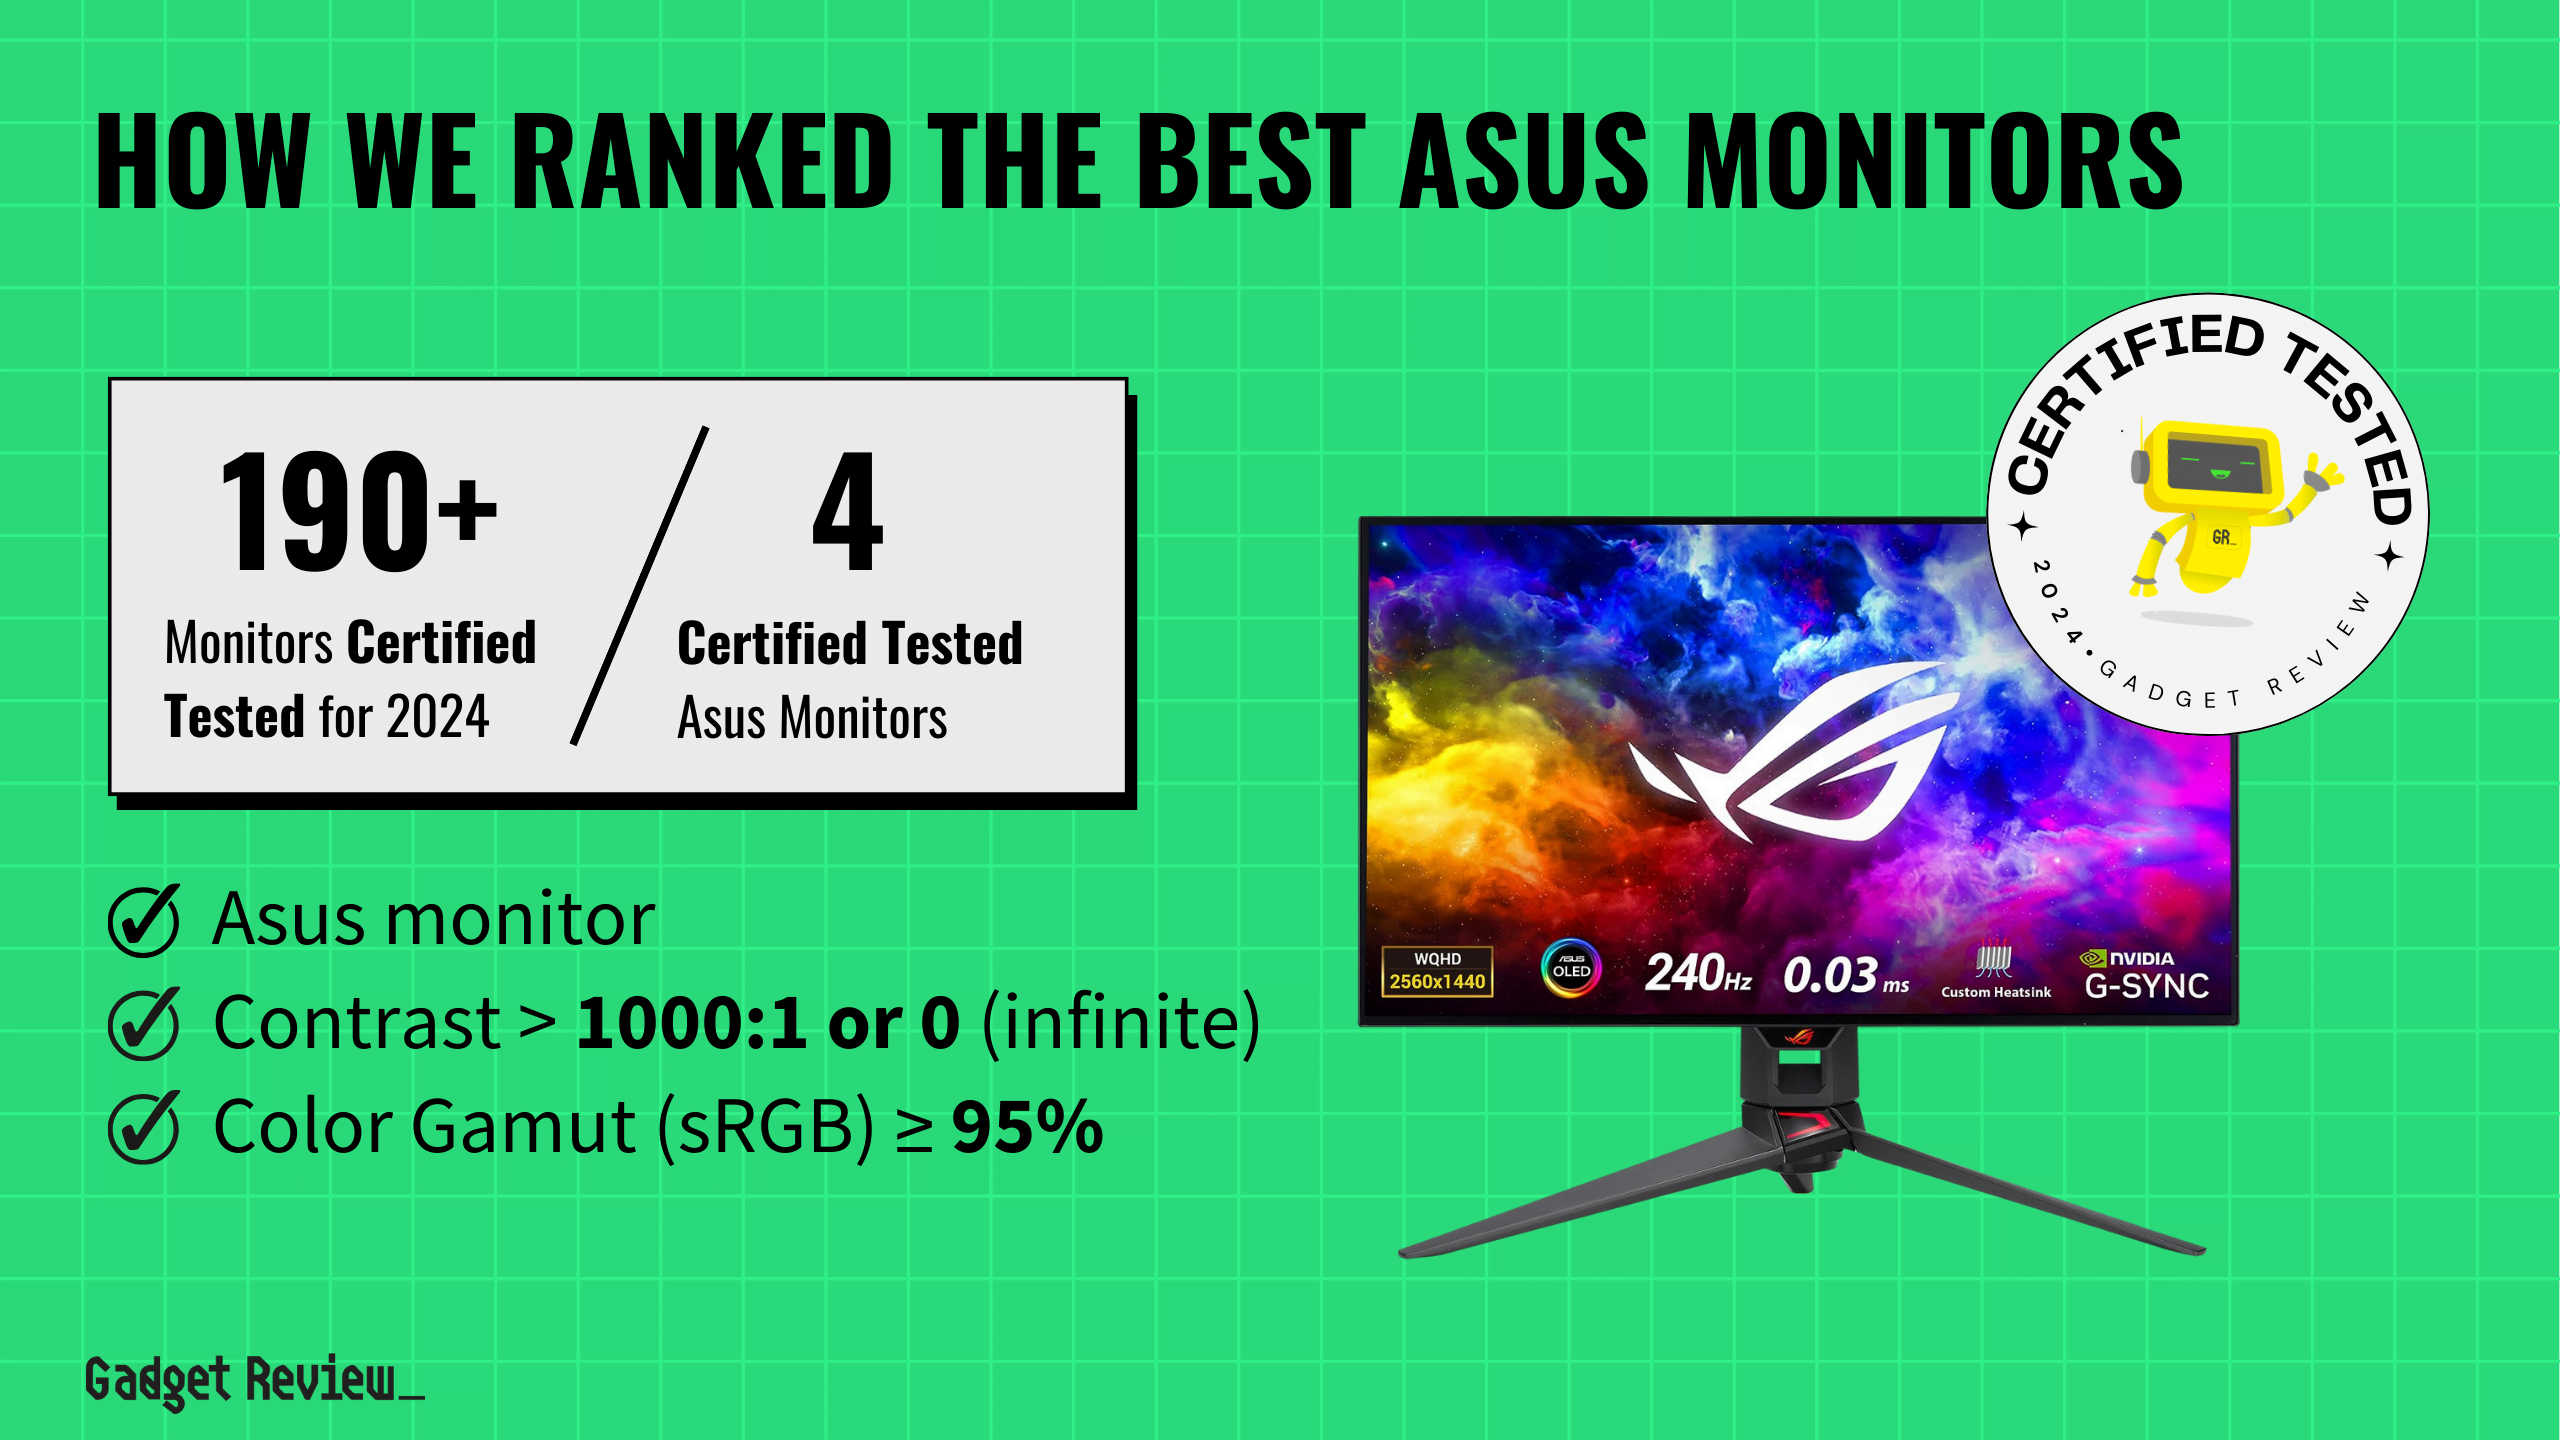 best asus monitor guide that shows the top best computer monitor model